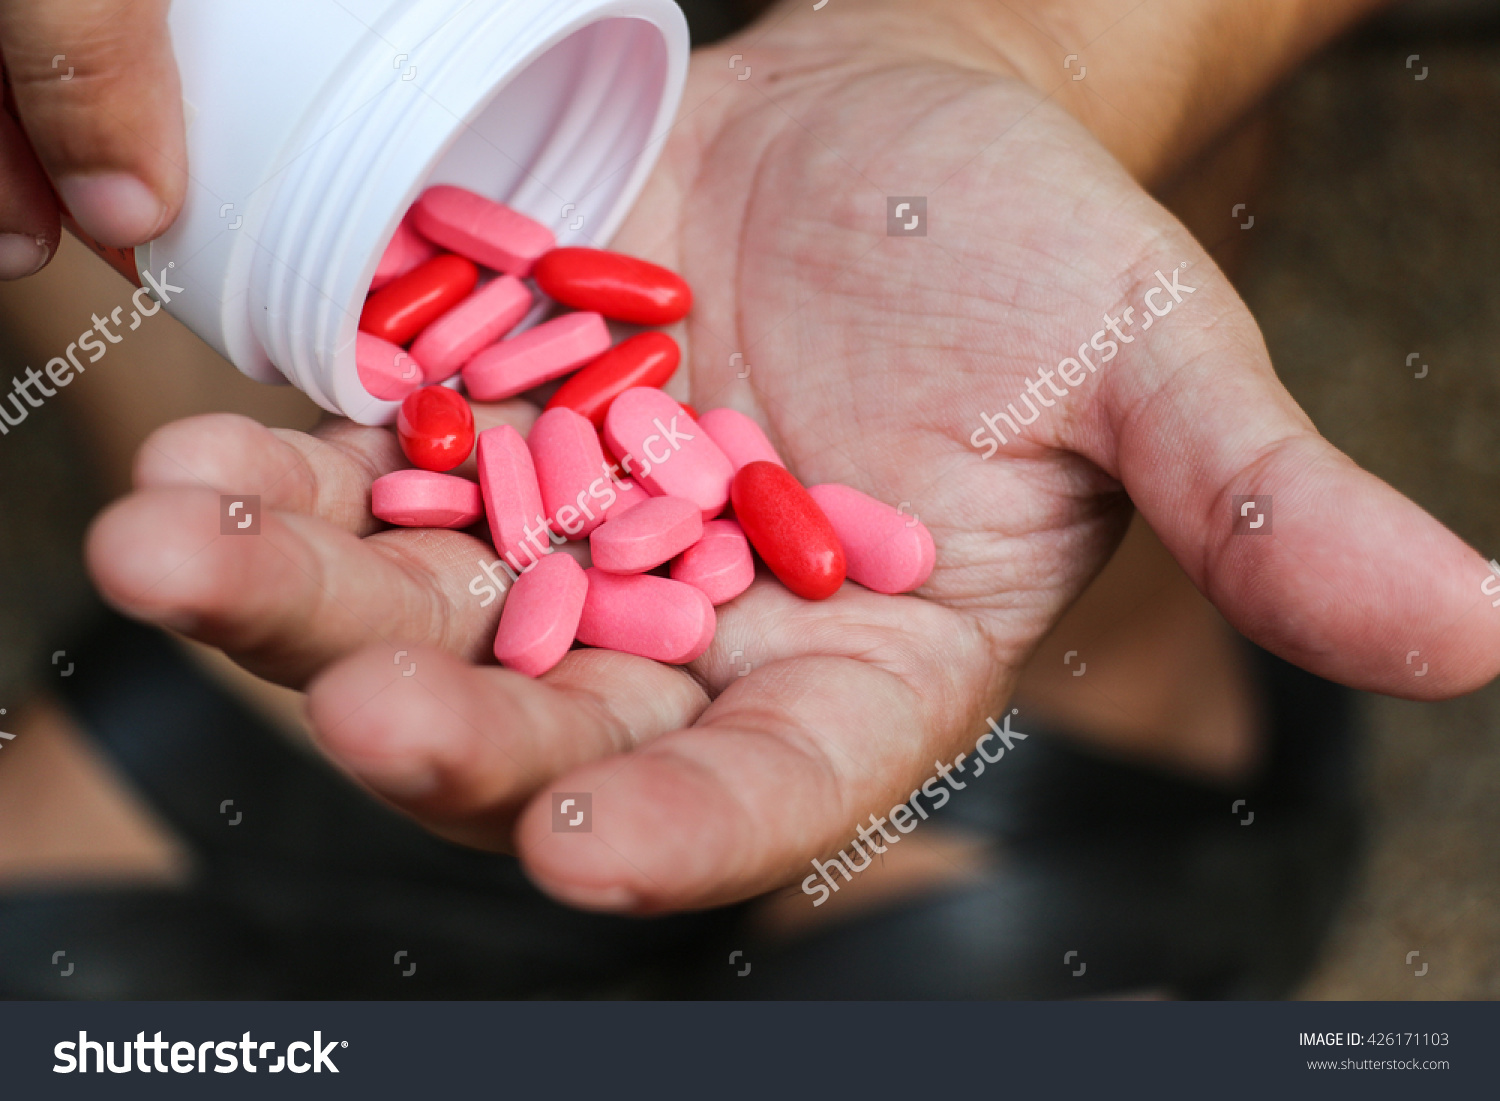 stock-photo-overdose-drug-addict-hand-pink-and-red-pills-on-hand-426171103.jpg